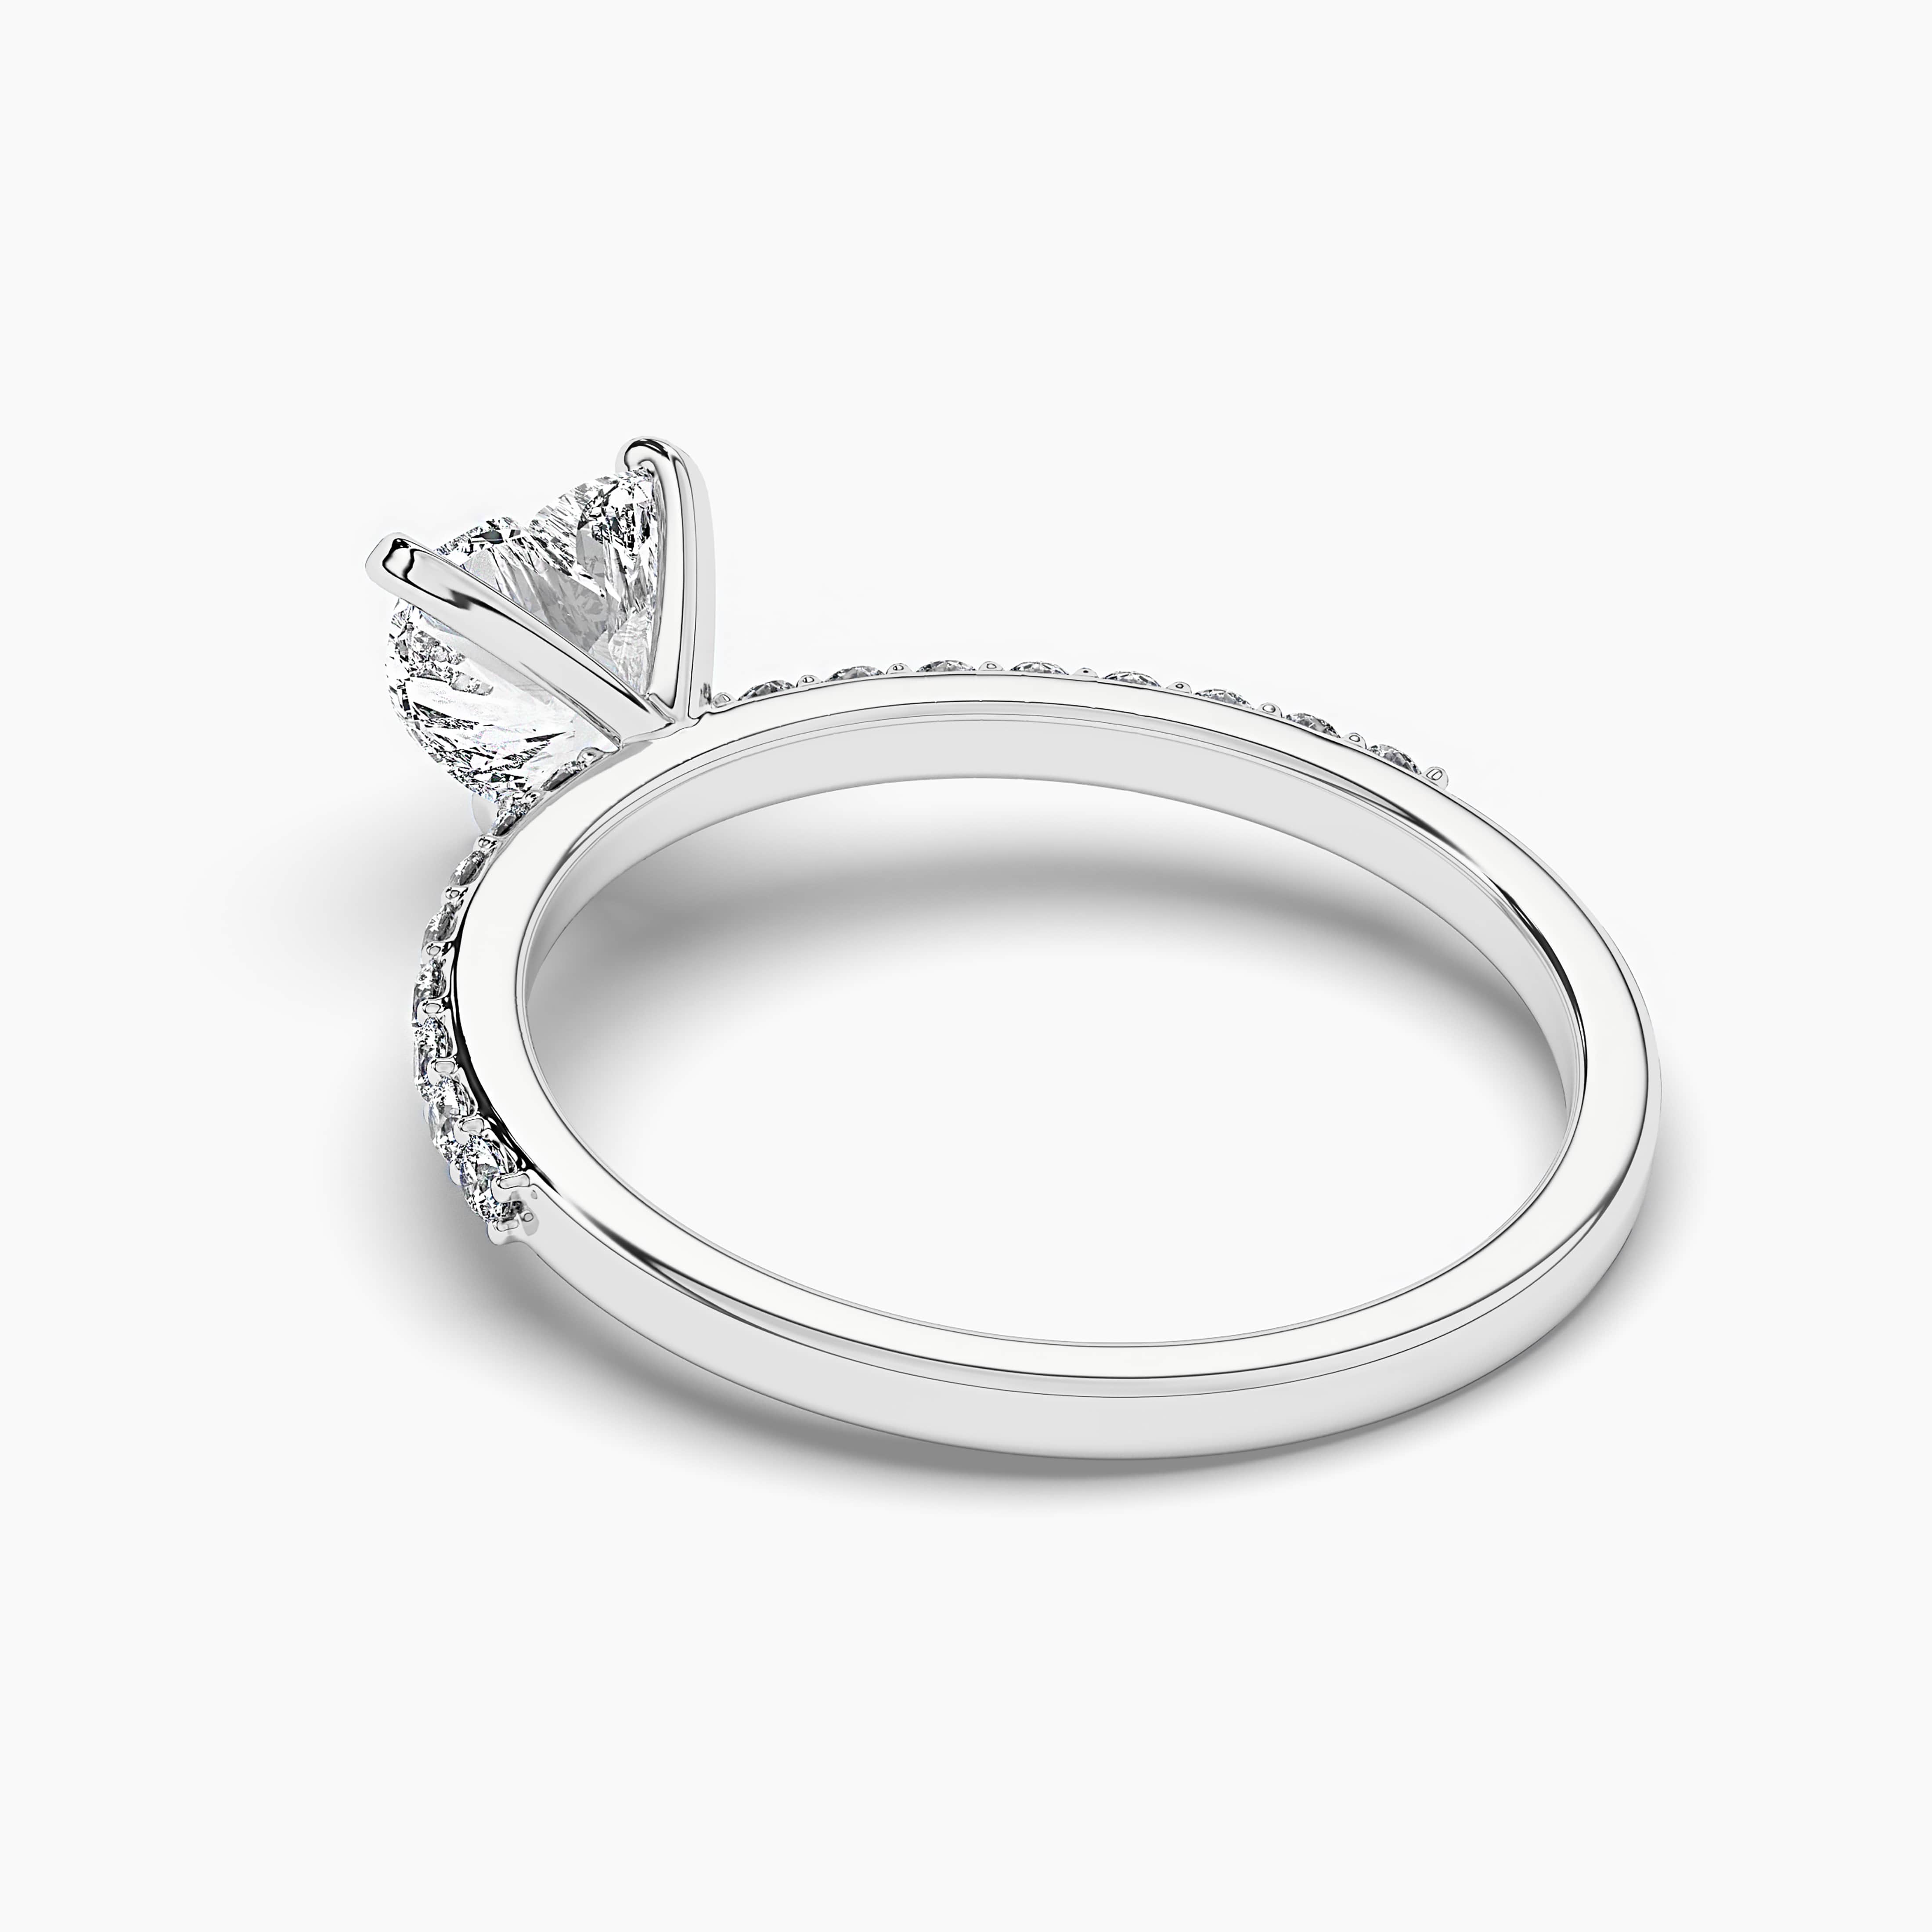 White gold engagement ring with heart-shaped diamond